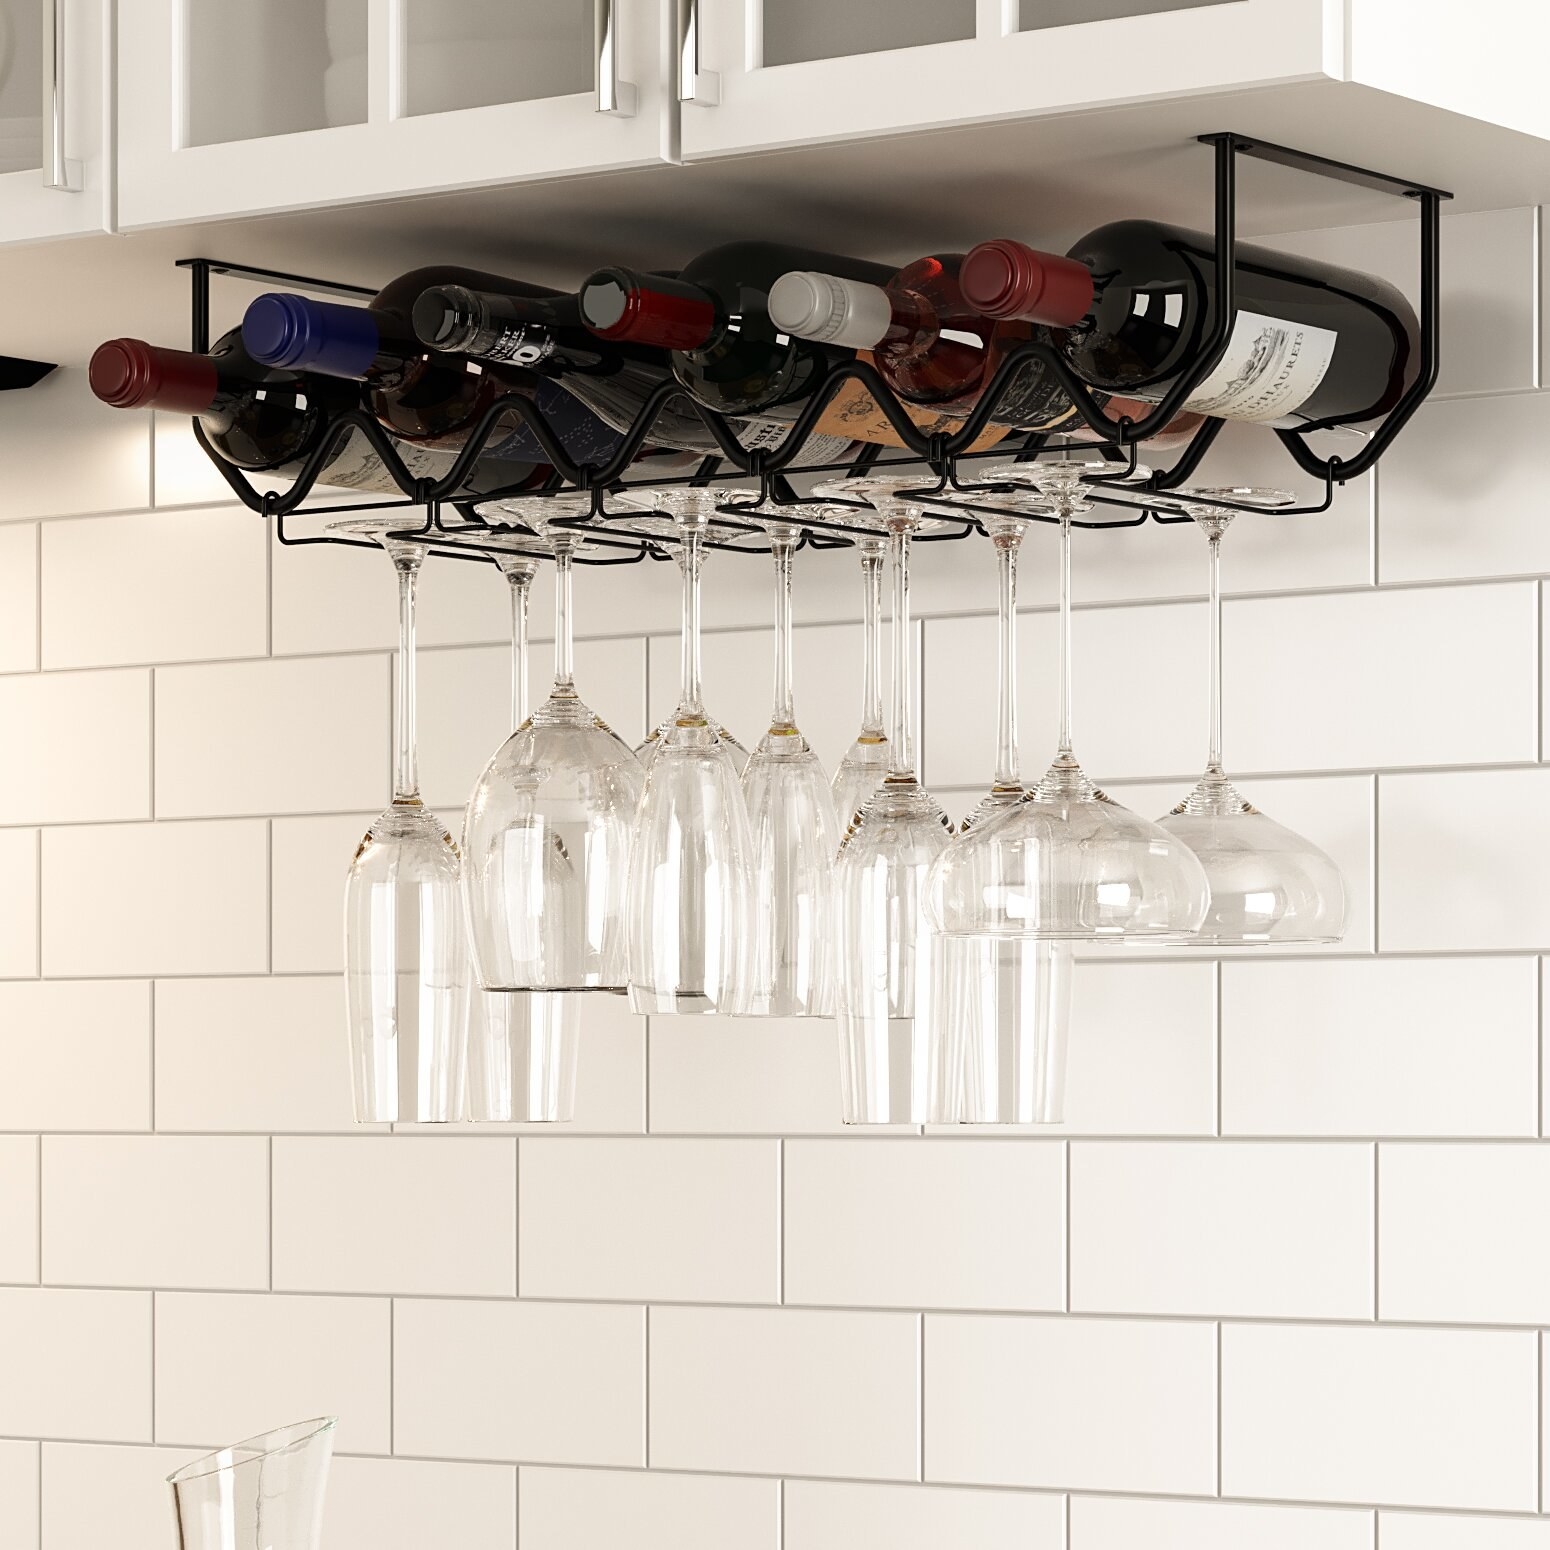 Black hanging glass rack in kitchen with glasses hanging down against a white wall